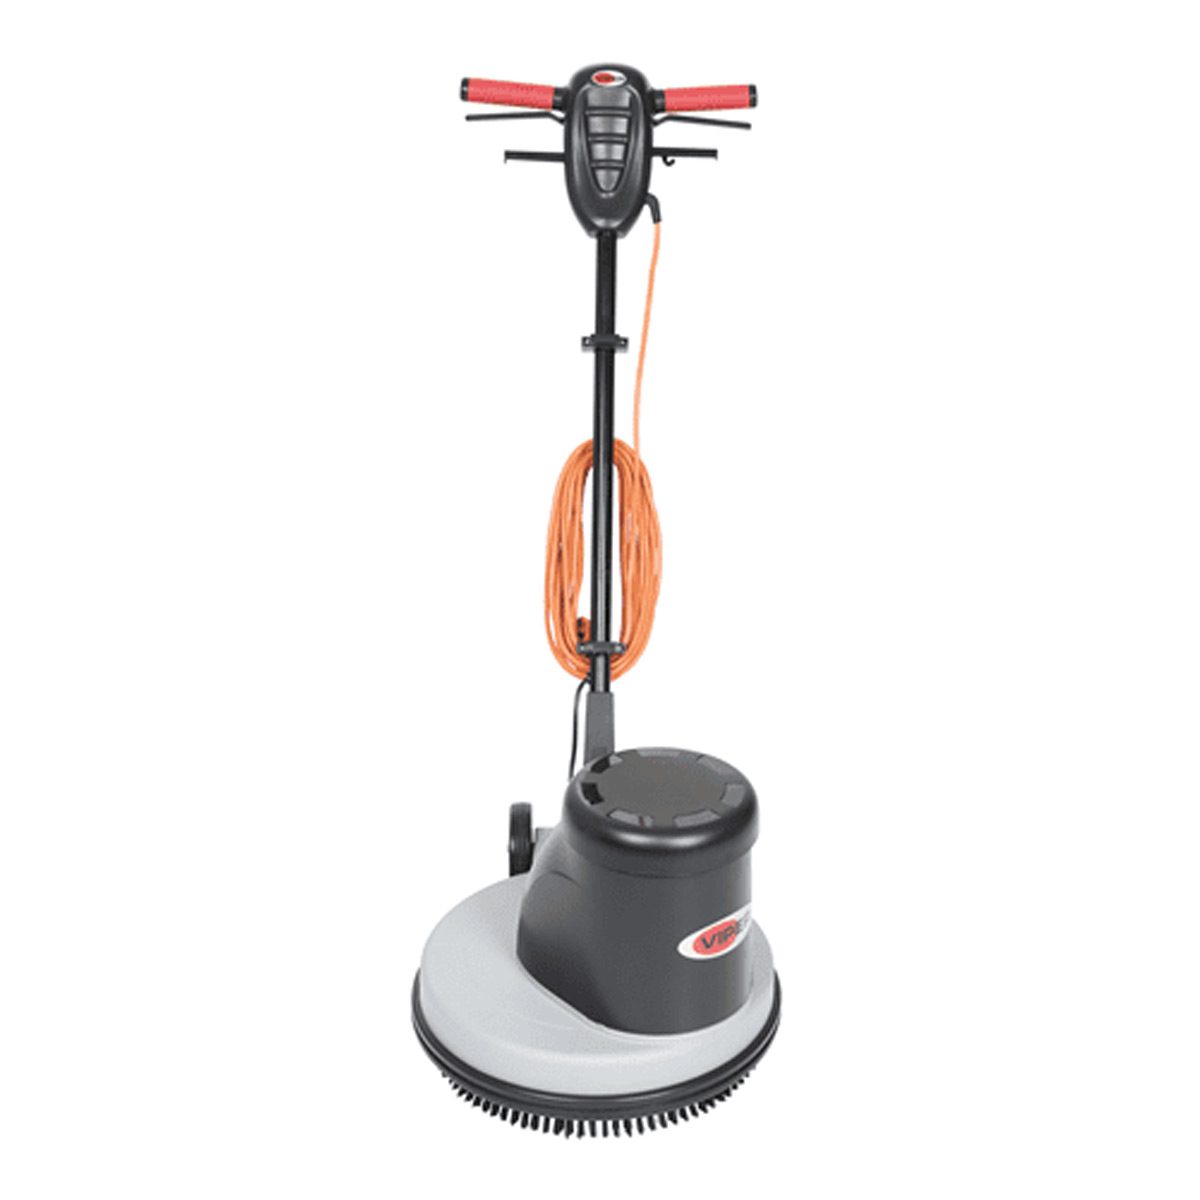 machinery-matting-floor-scrubbers-viper-HS350-polisher-scrubber-perfect-solution-for-hard-floor-scrubbing-heavy-duty-cleaning-high-speed-single-disc-machine-scrubbing-buffering-vjs-distributors-HS350